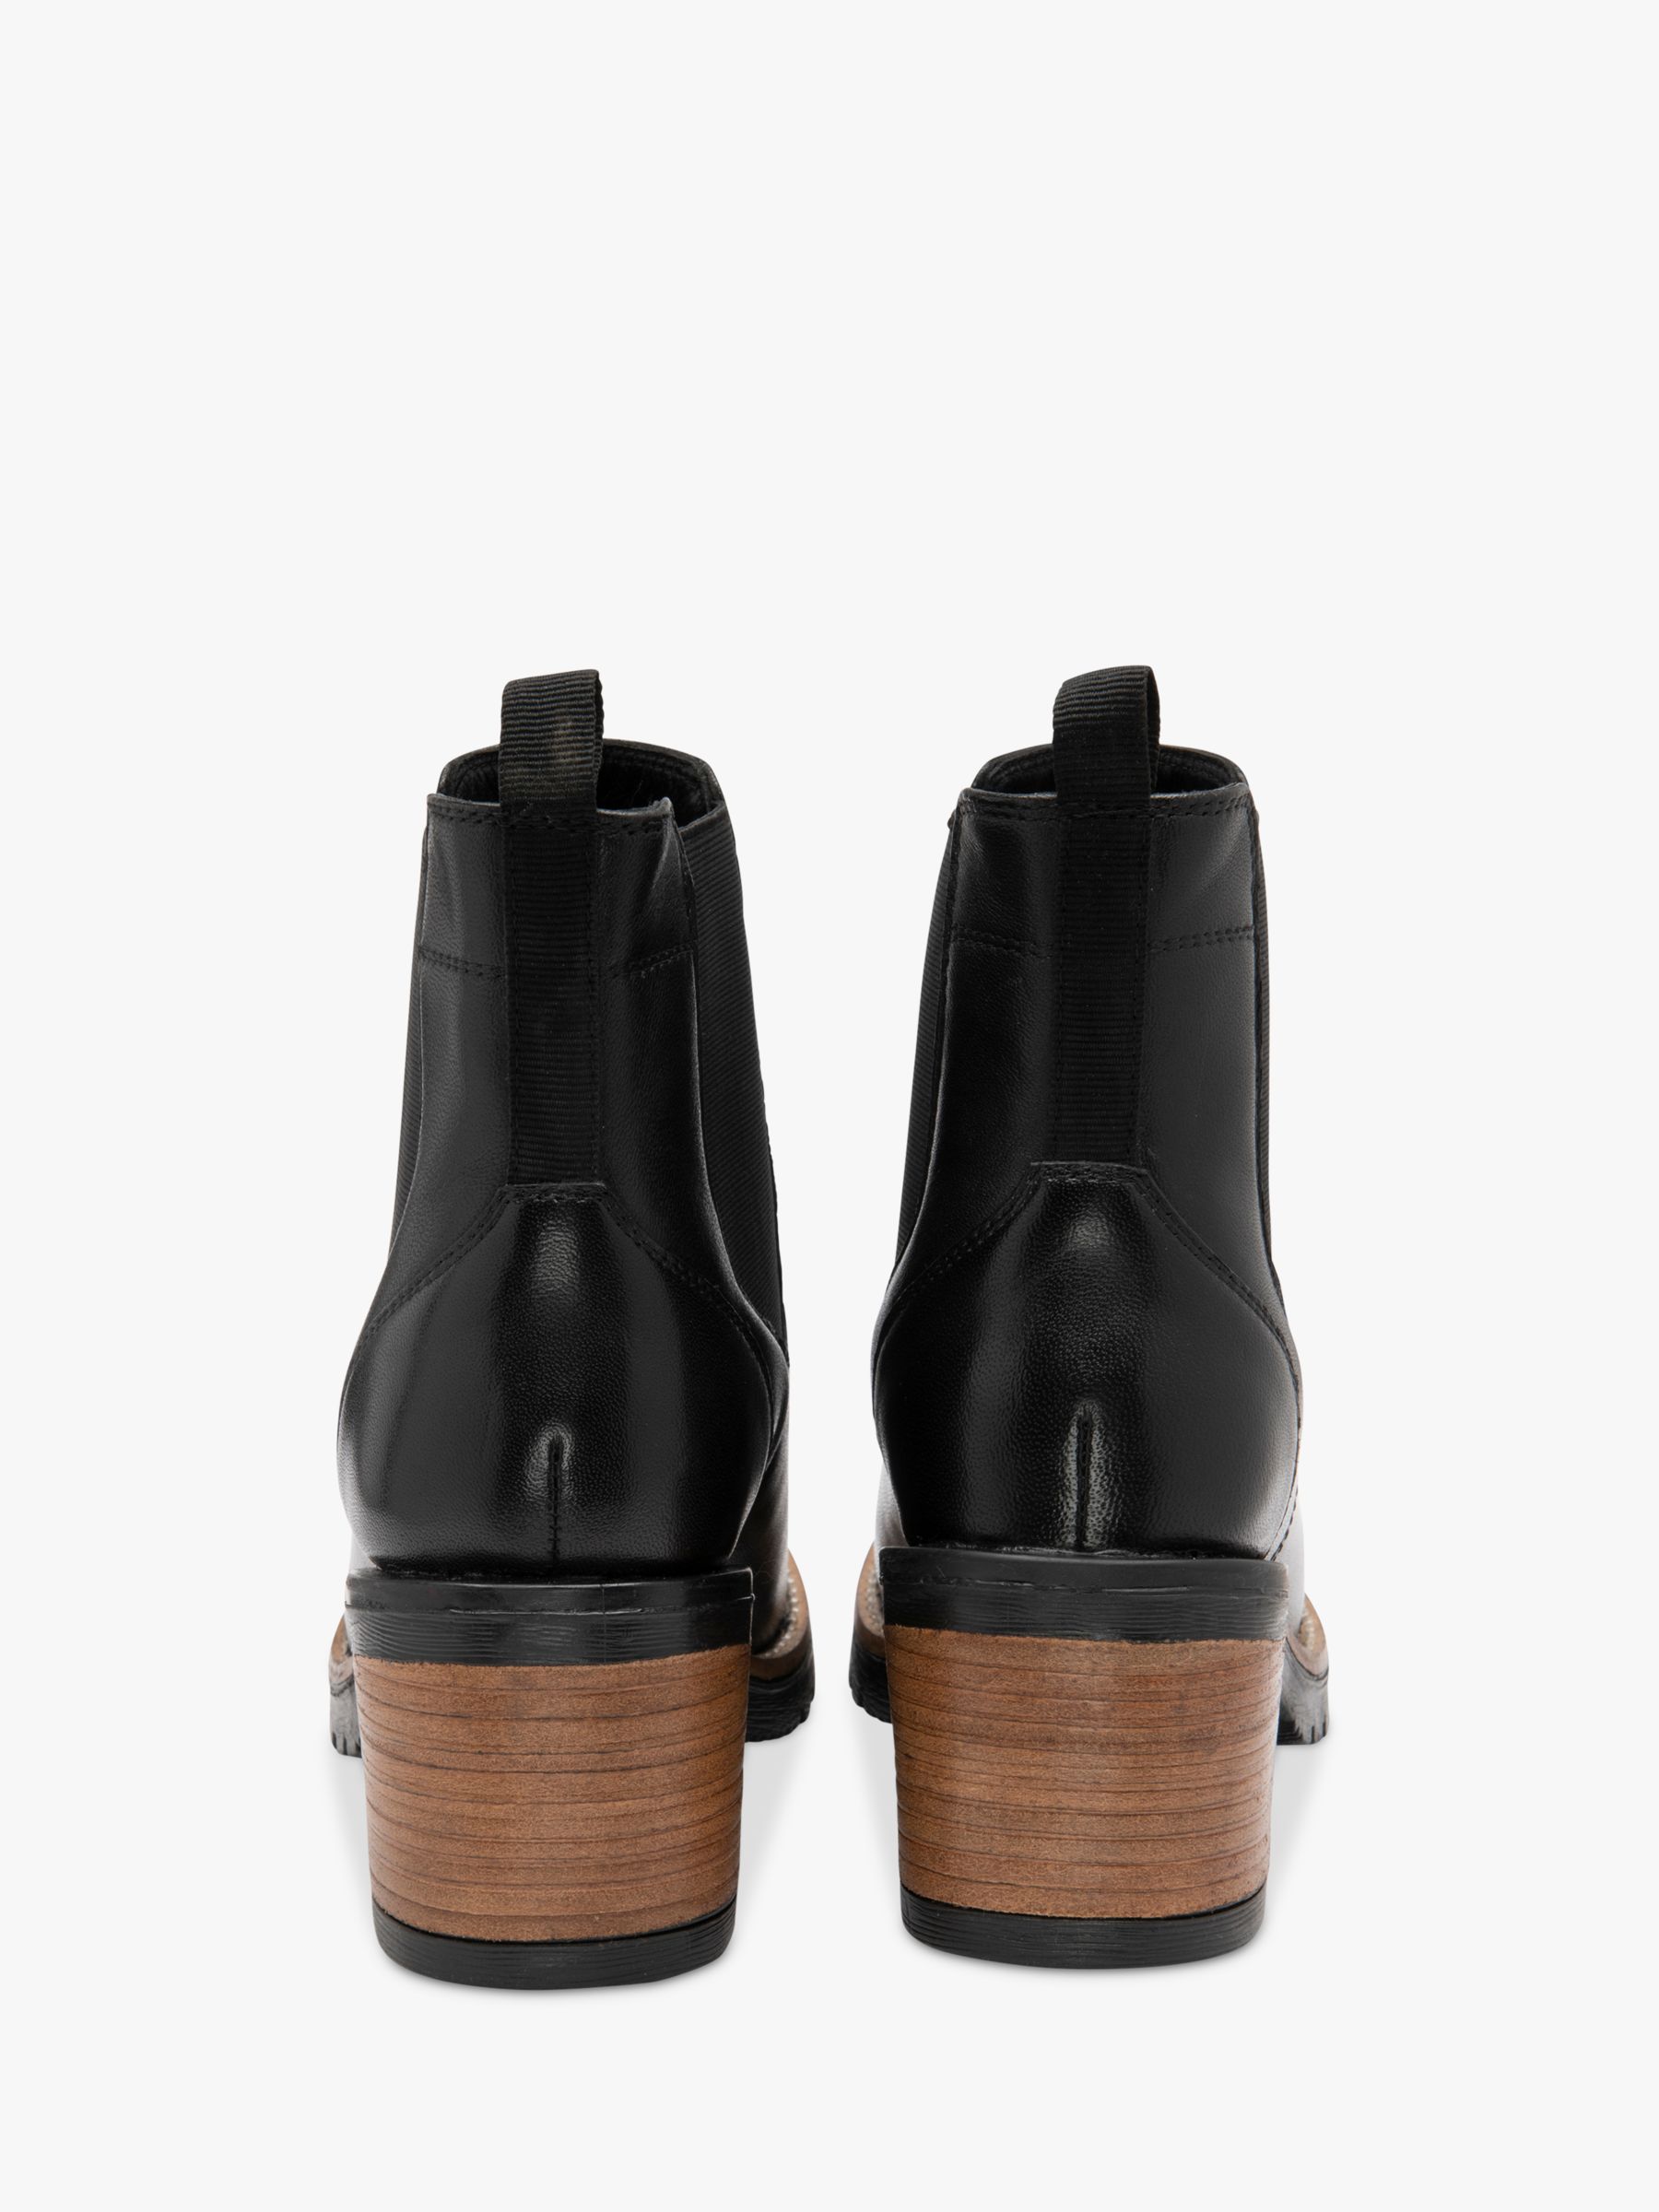 Buy Ravel Bray Leather Block Heel Ankle Boots Online at johnlewis.com